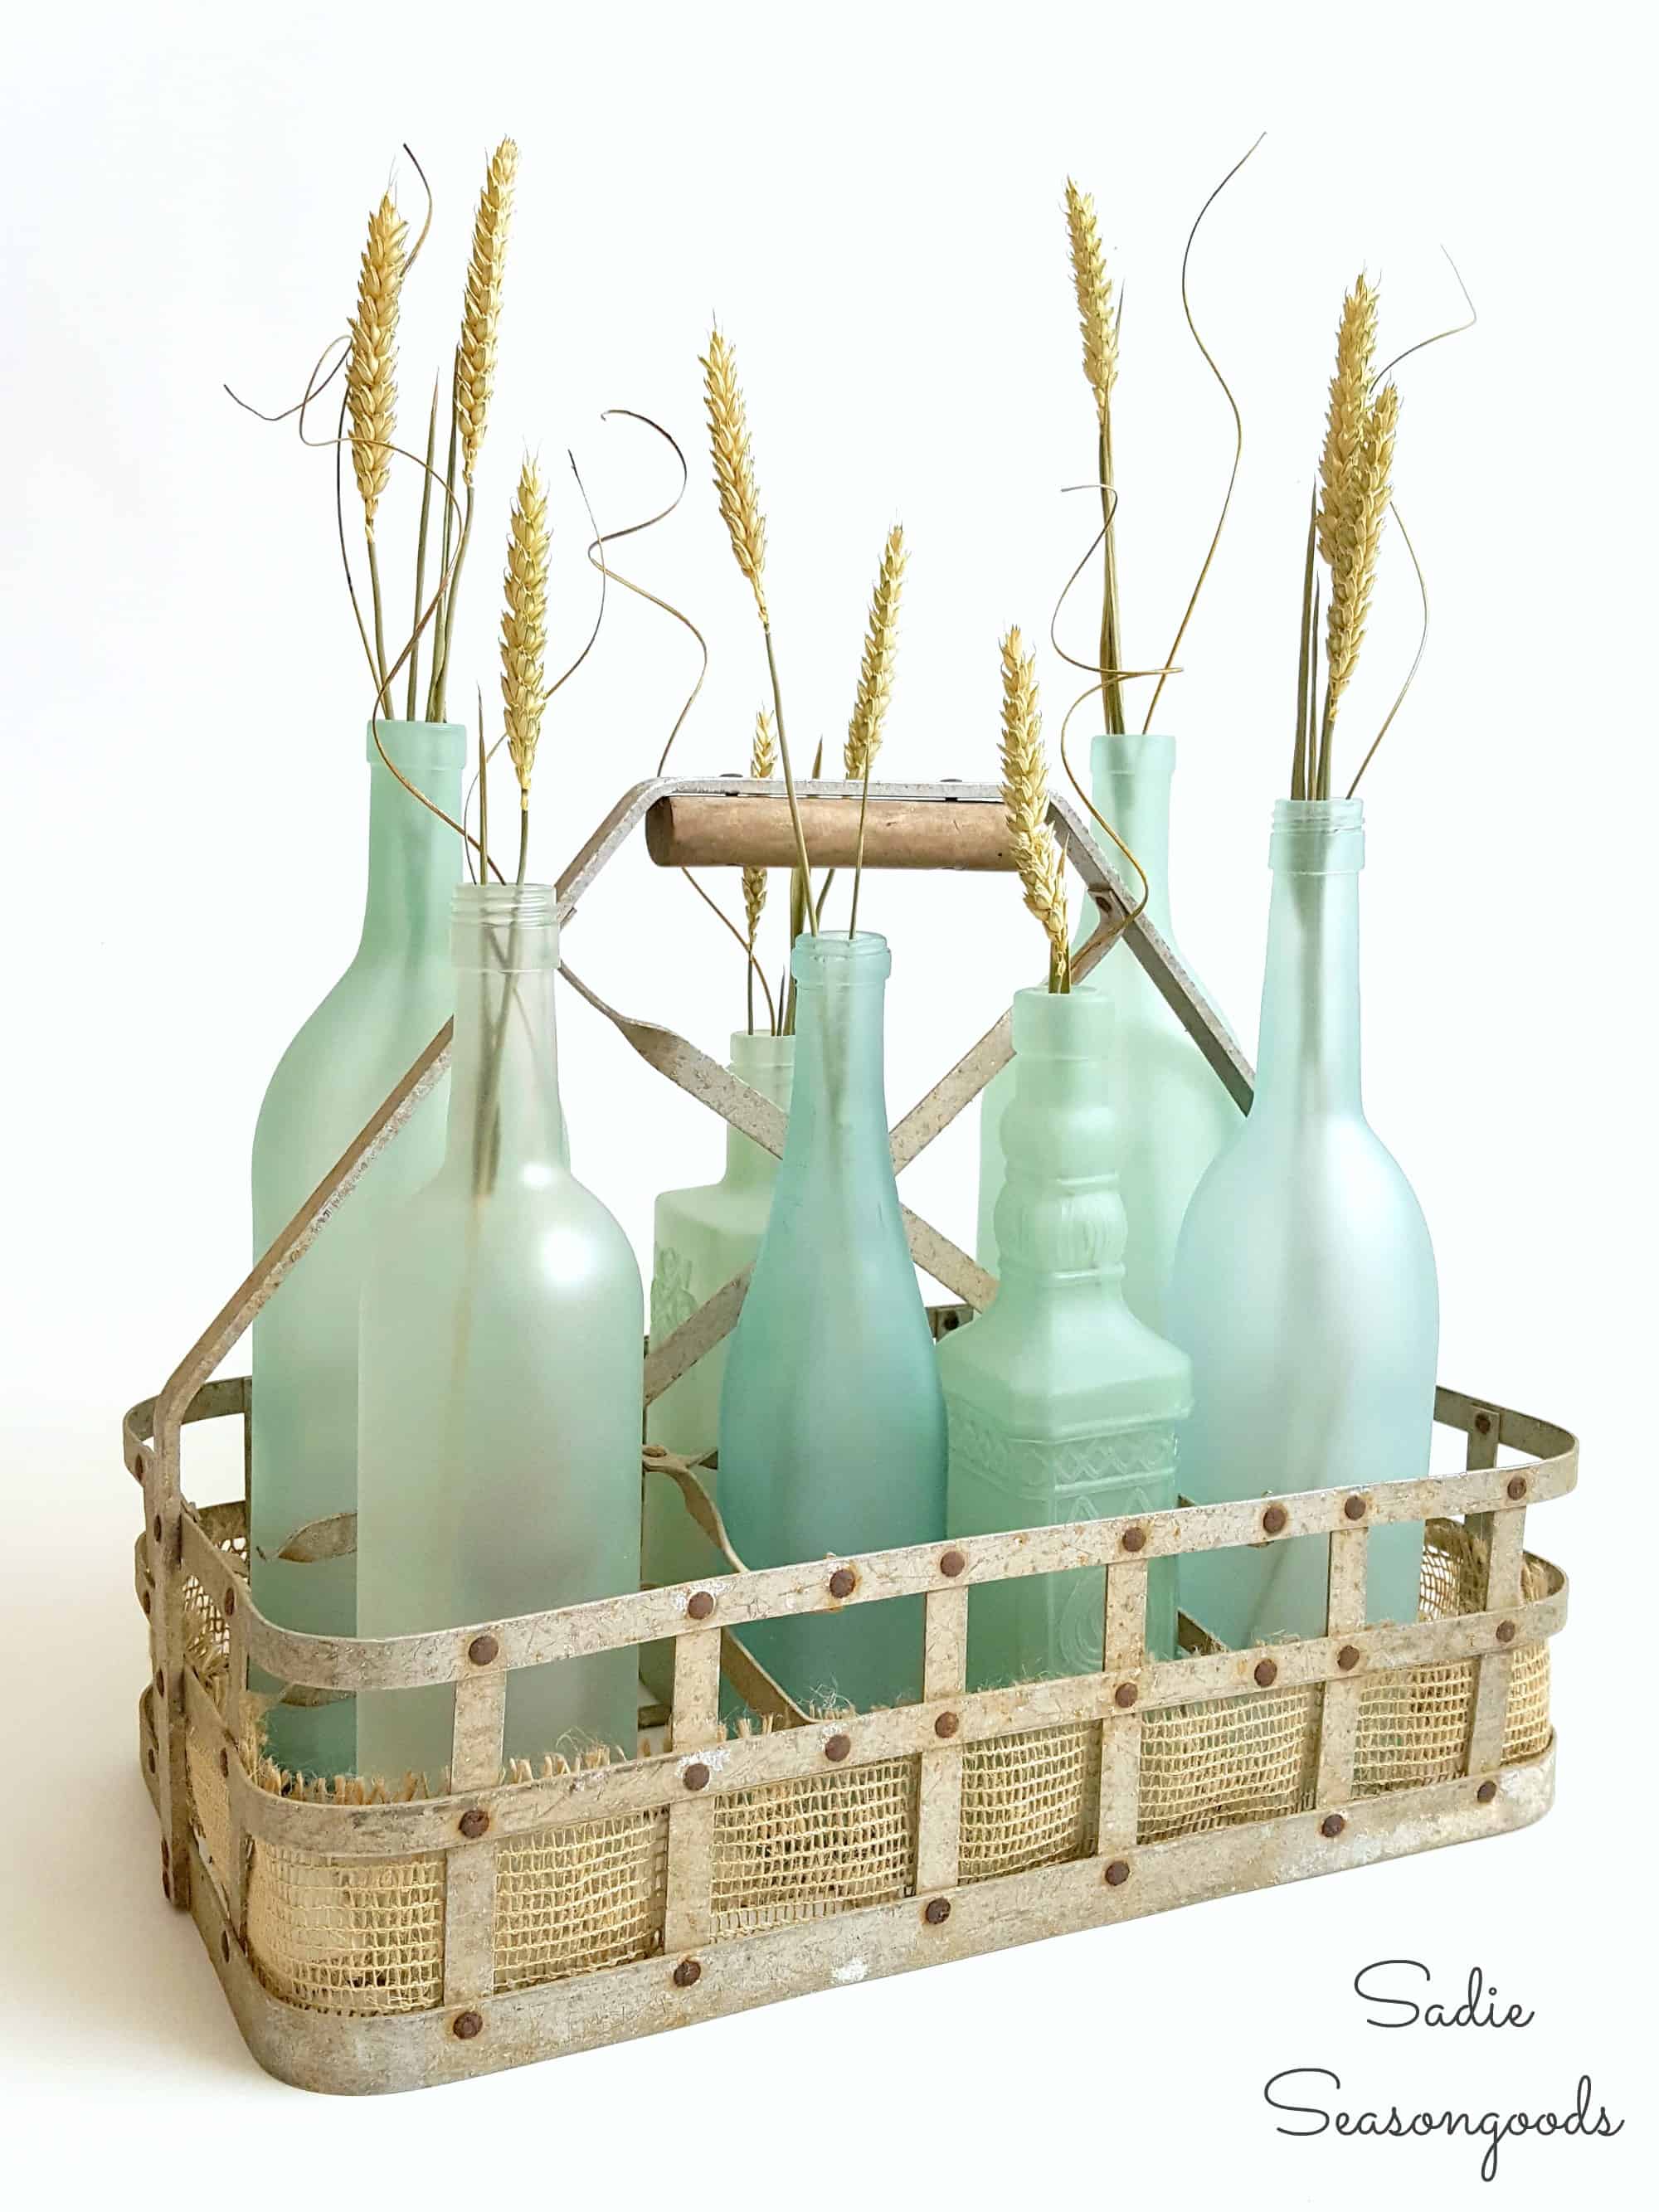 Sea glass-colored vases filled with dune grass sit in a brown basket.